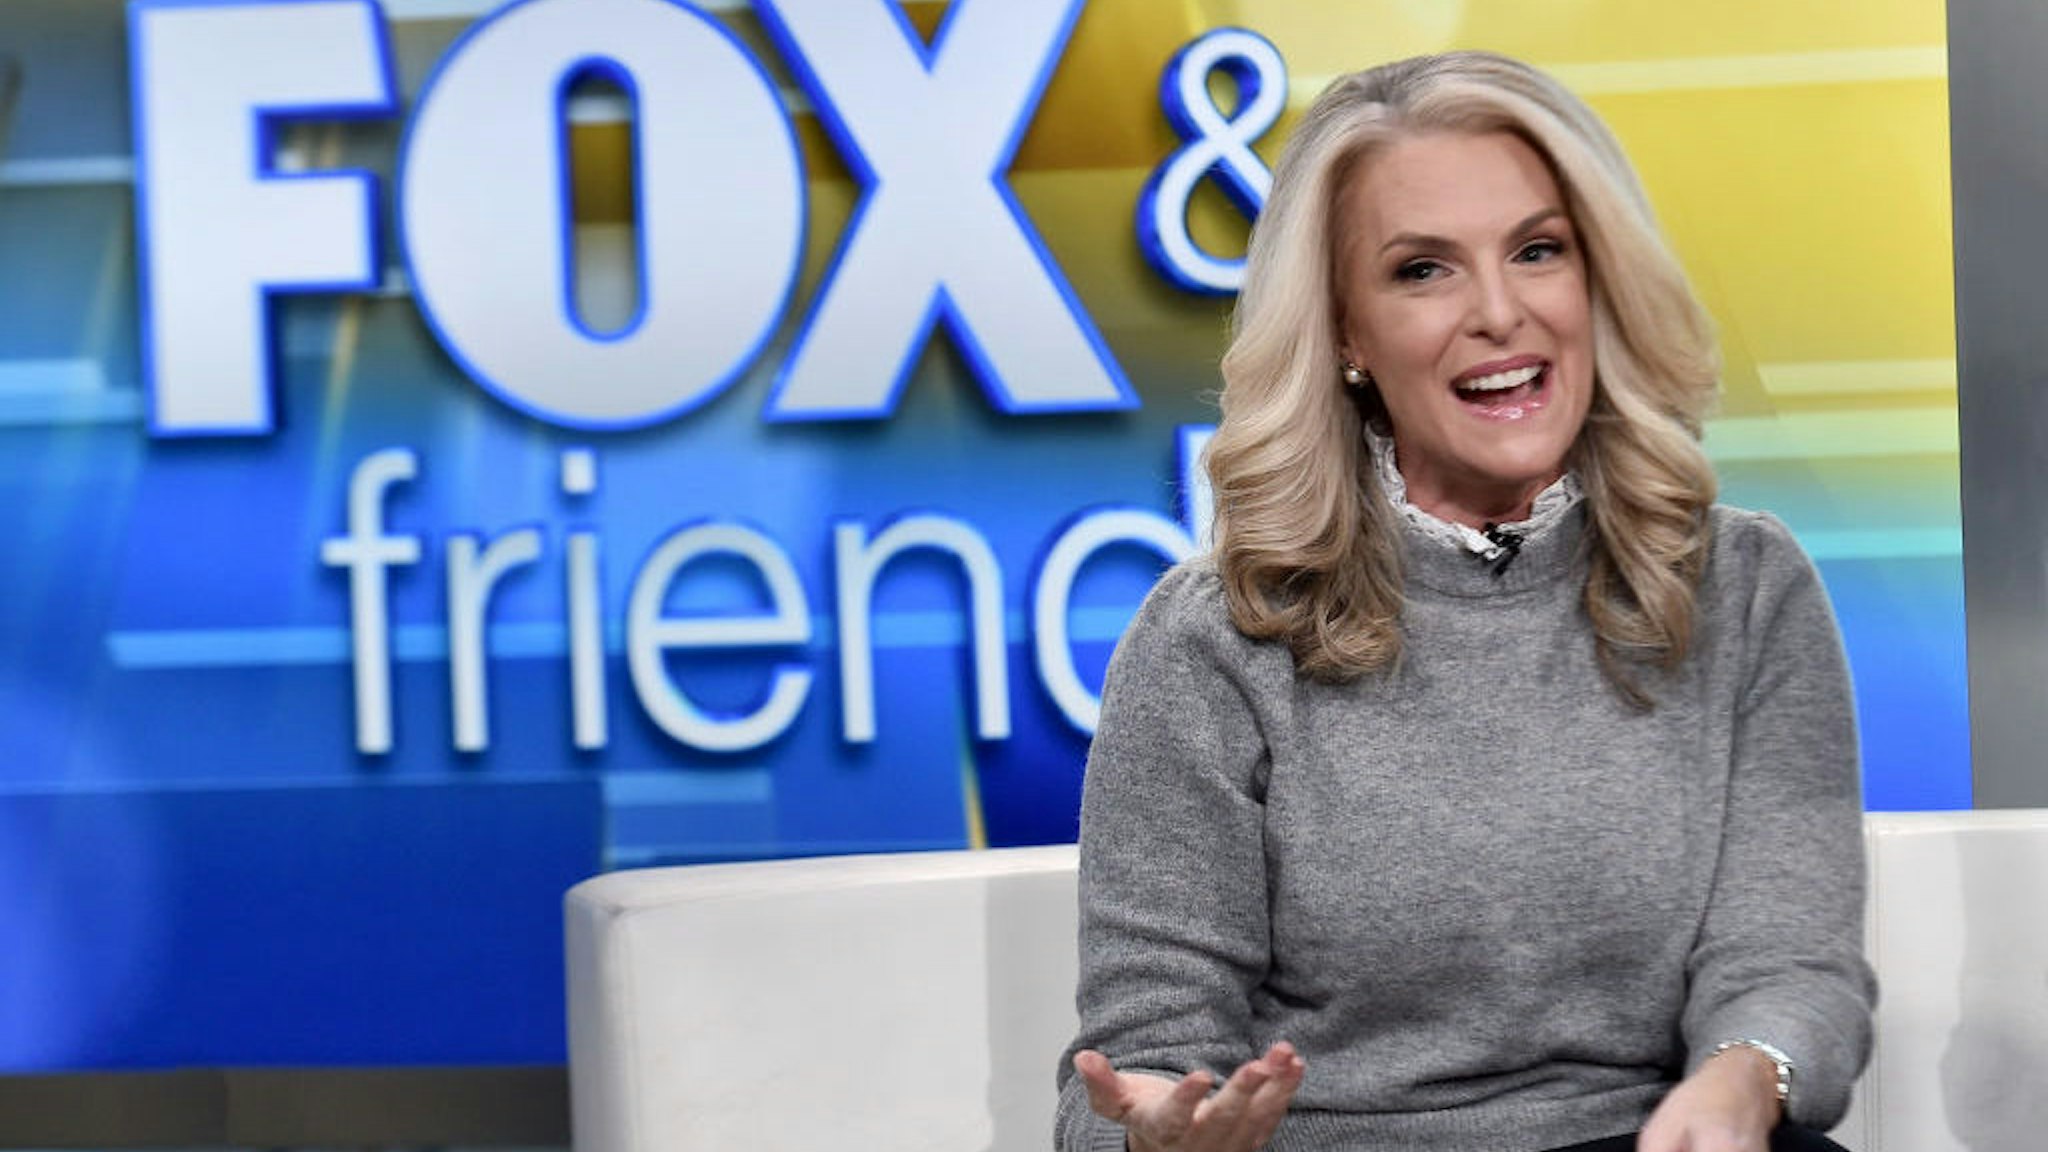 NEW YORK, NEW YORK - NOVEMBER 04: (EXCLUSIVE COVERAGE) Janice Dean presents on "Fox &amp; Friends" at Fox News Channel Studios on November 04, 2019 in New York City. (Photo by Steven Ferdman/Getty Images)